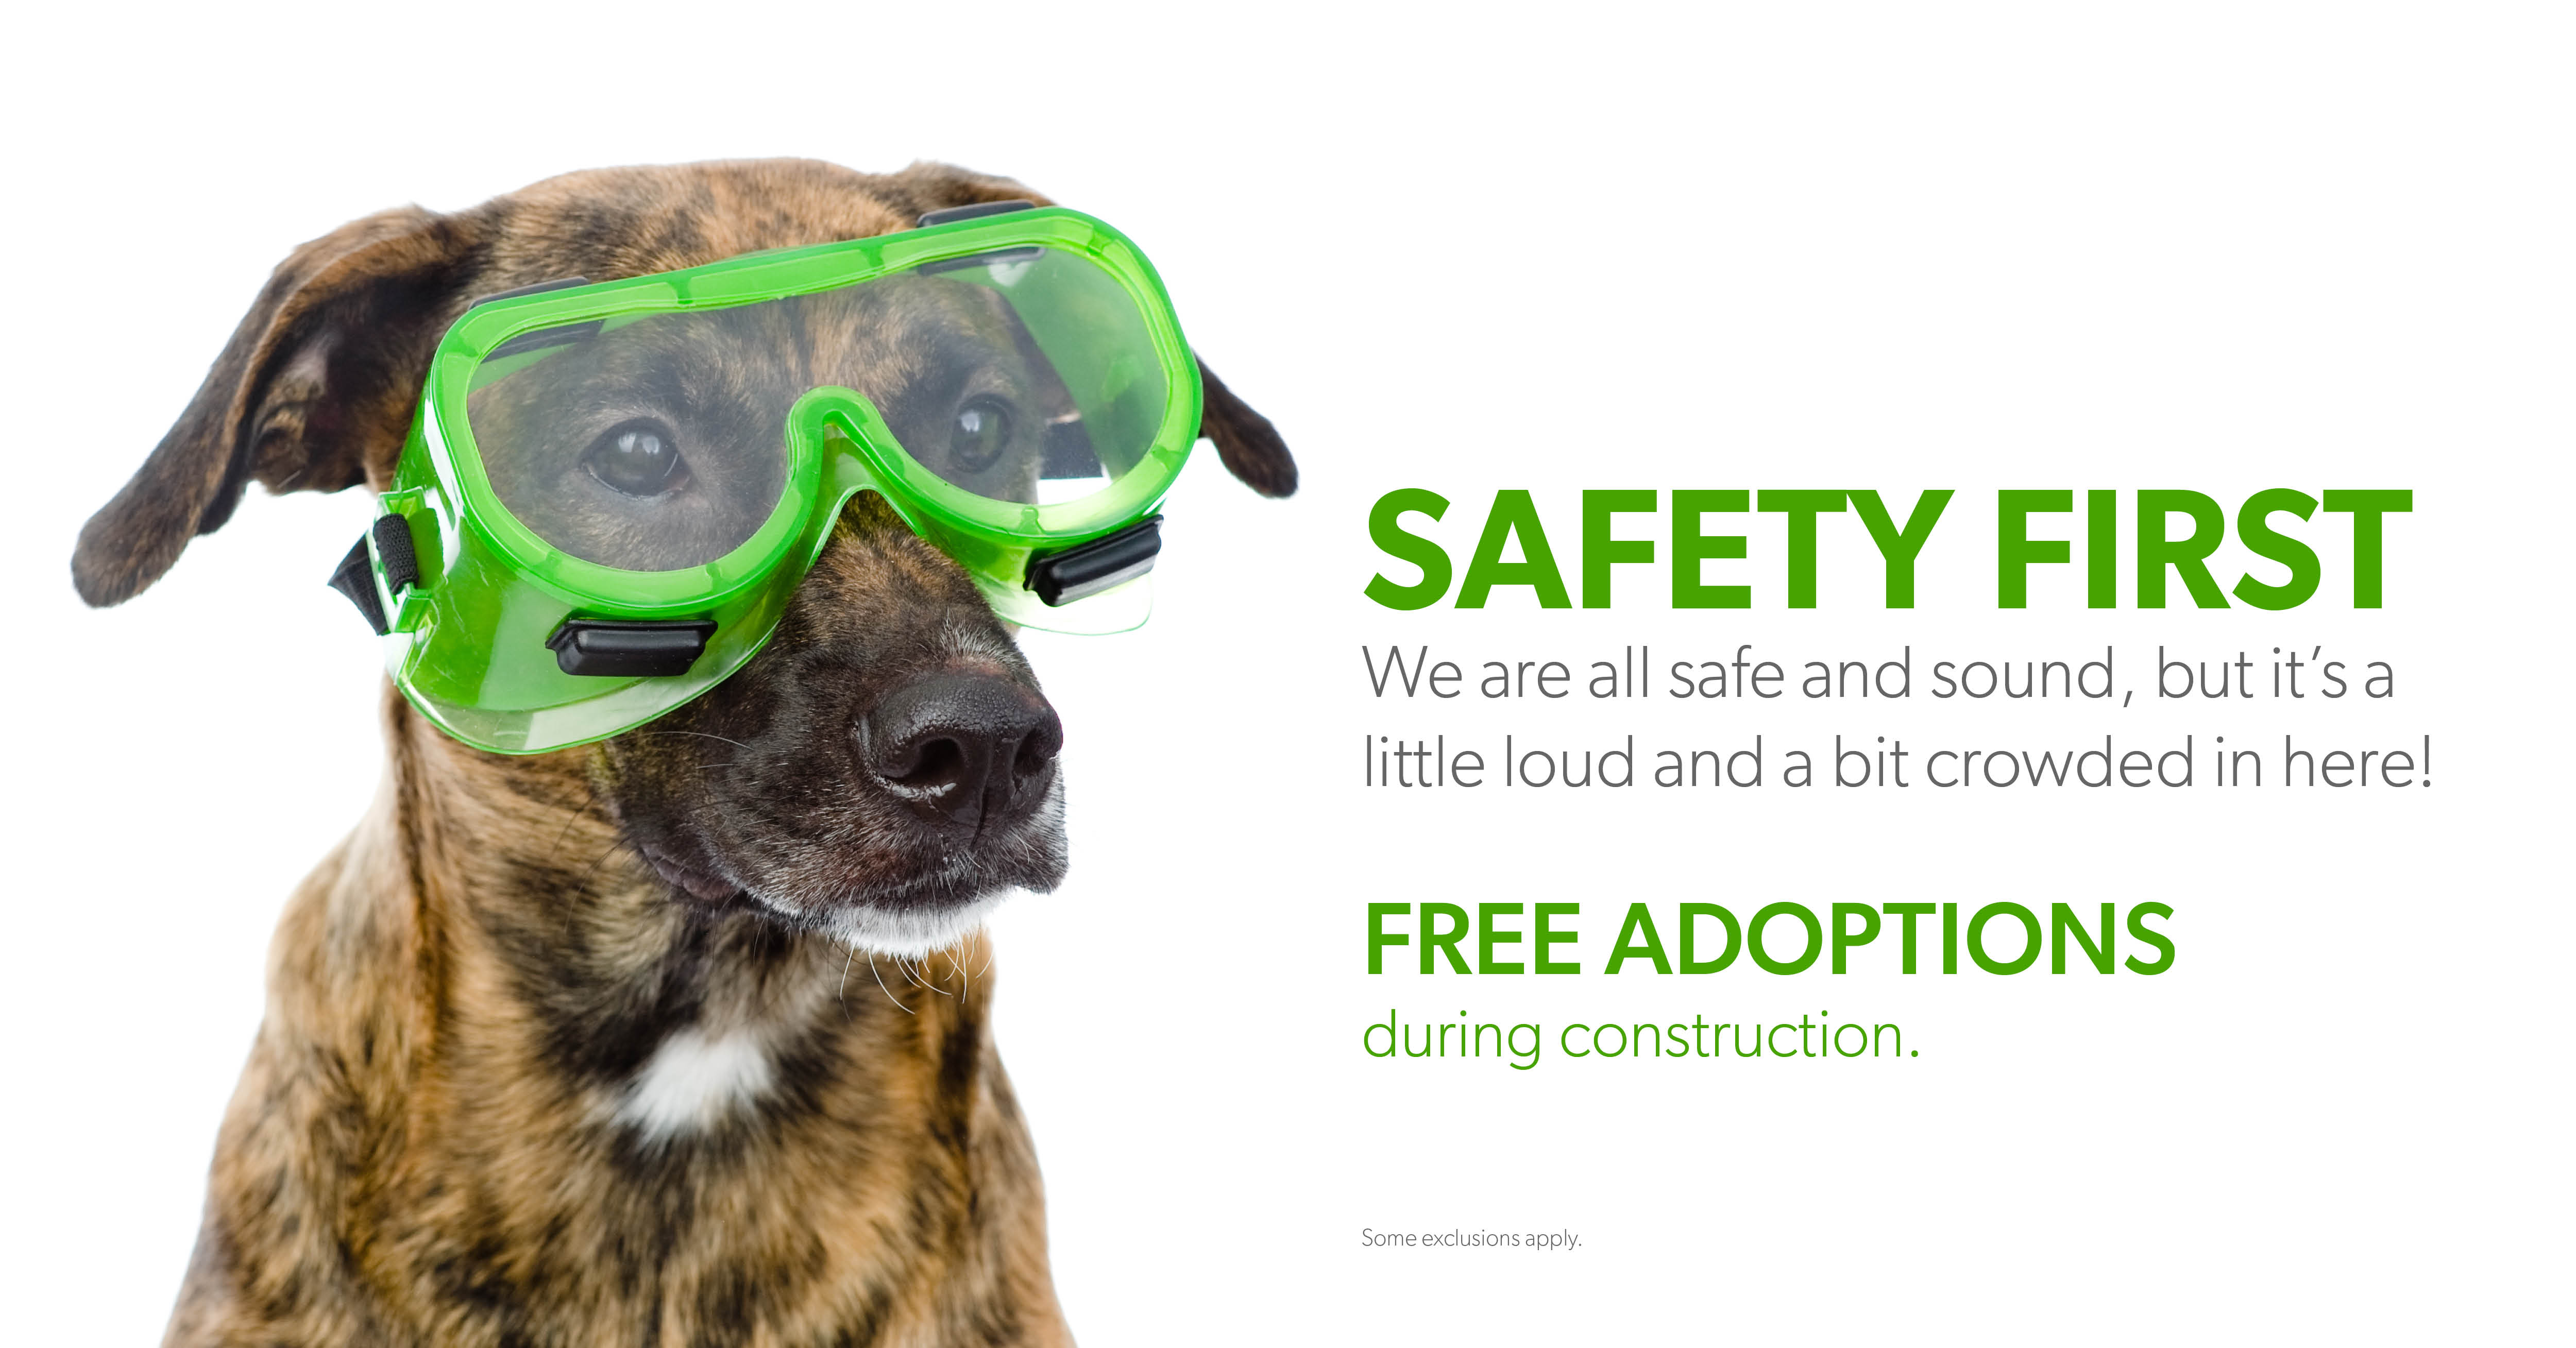 Animal Shelter under construction - free adoptions until hard hats  disappear - City of Huntsville